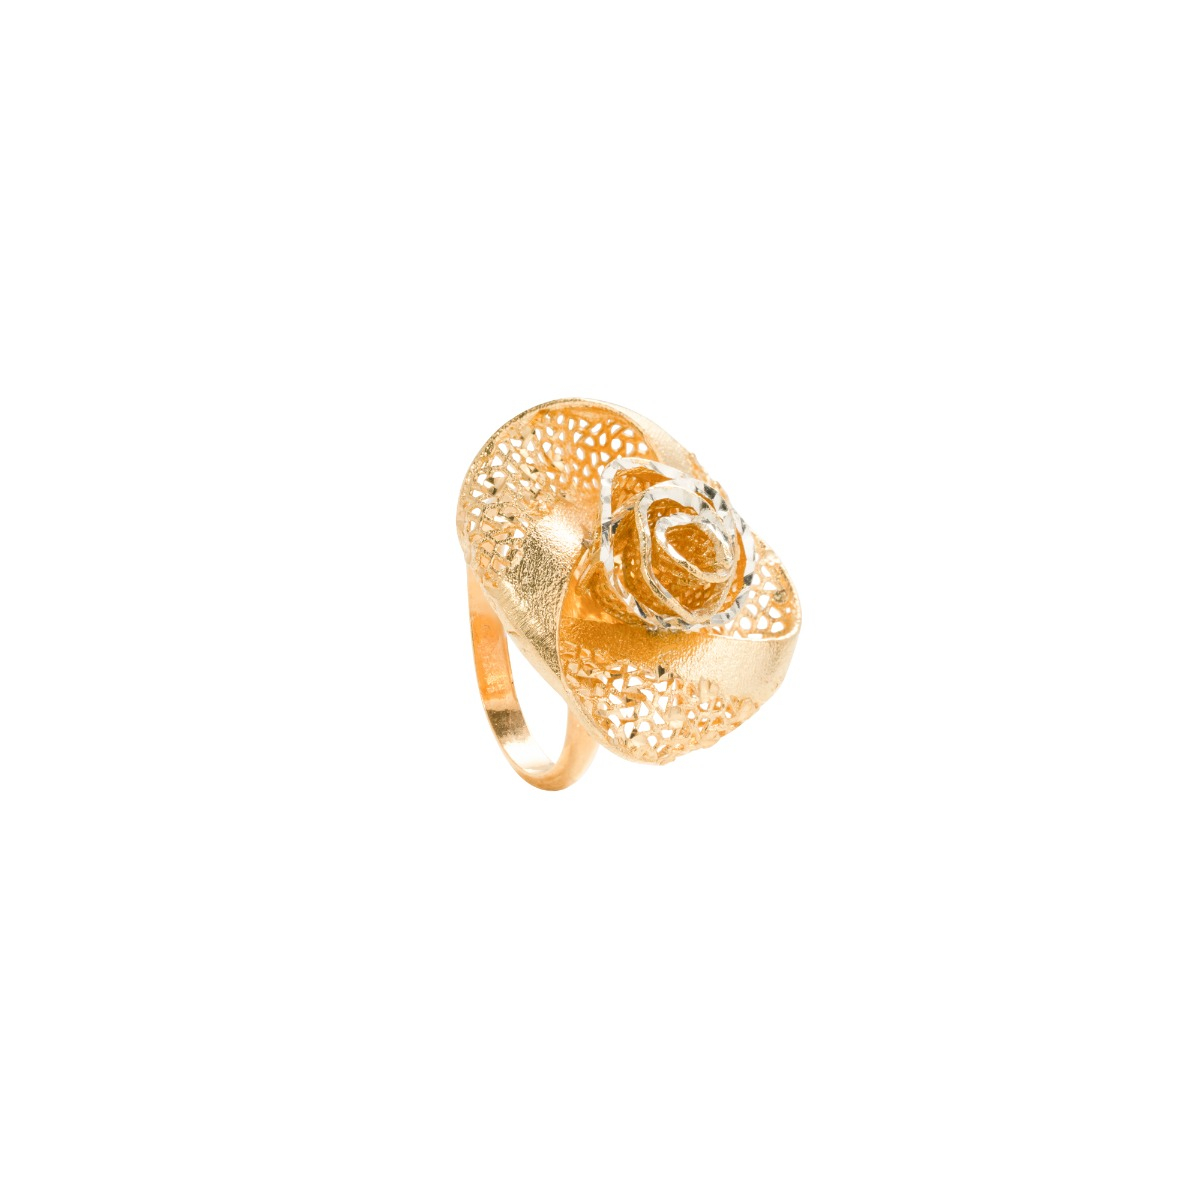 Single Rose Ring in Yellow Silver